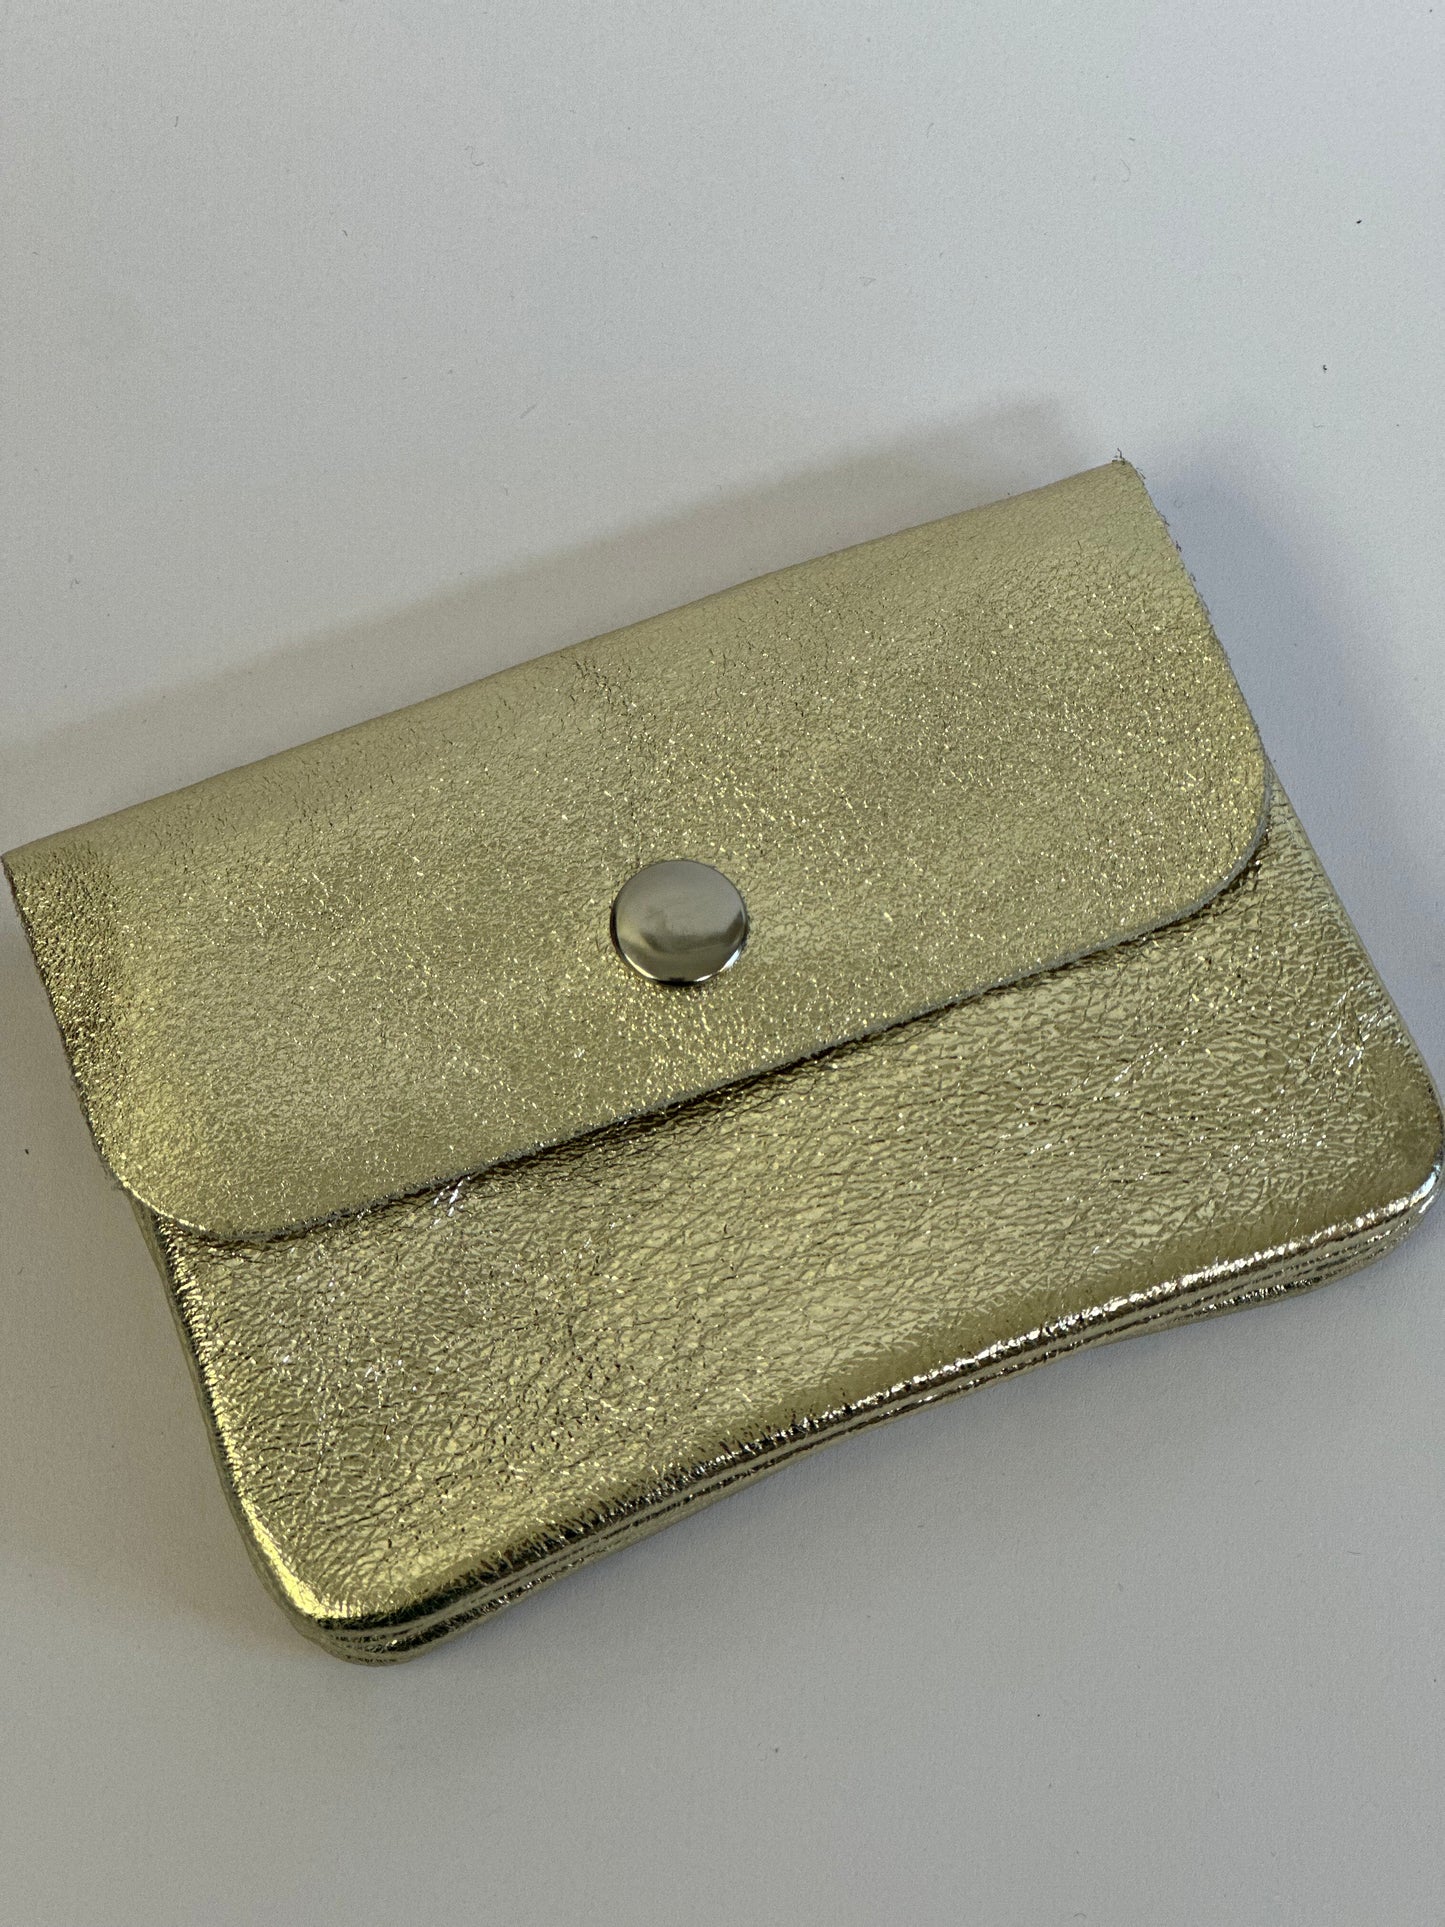 Metallic leather coin purses - Variety of colours